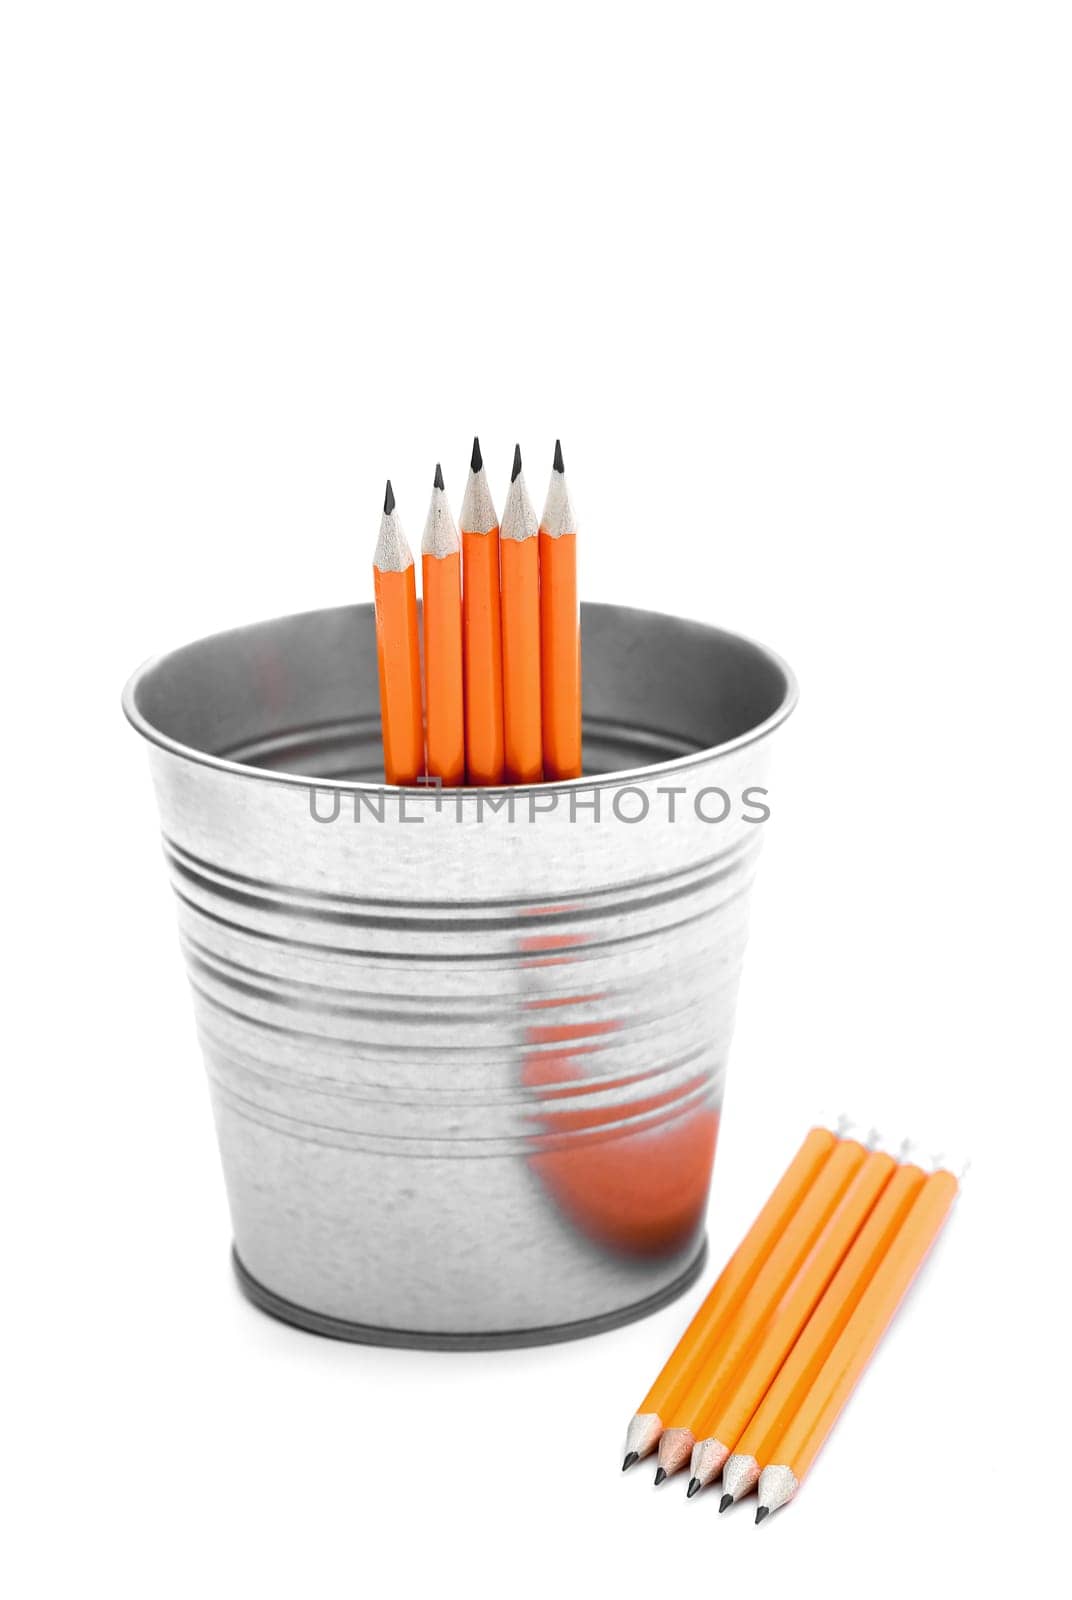 Isolated orange pencils on a clean white background in a metal bucket